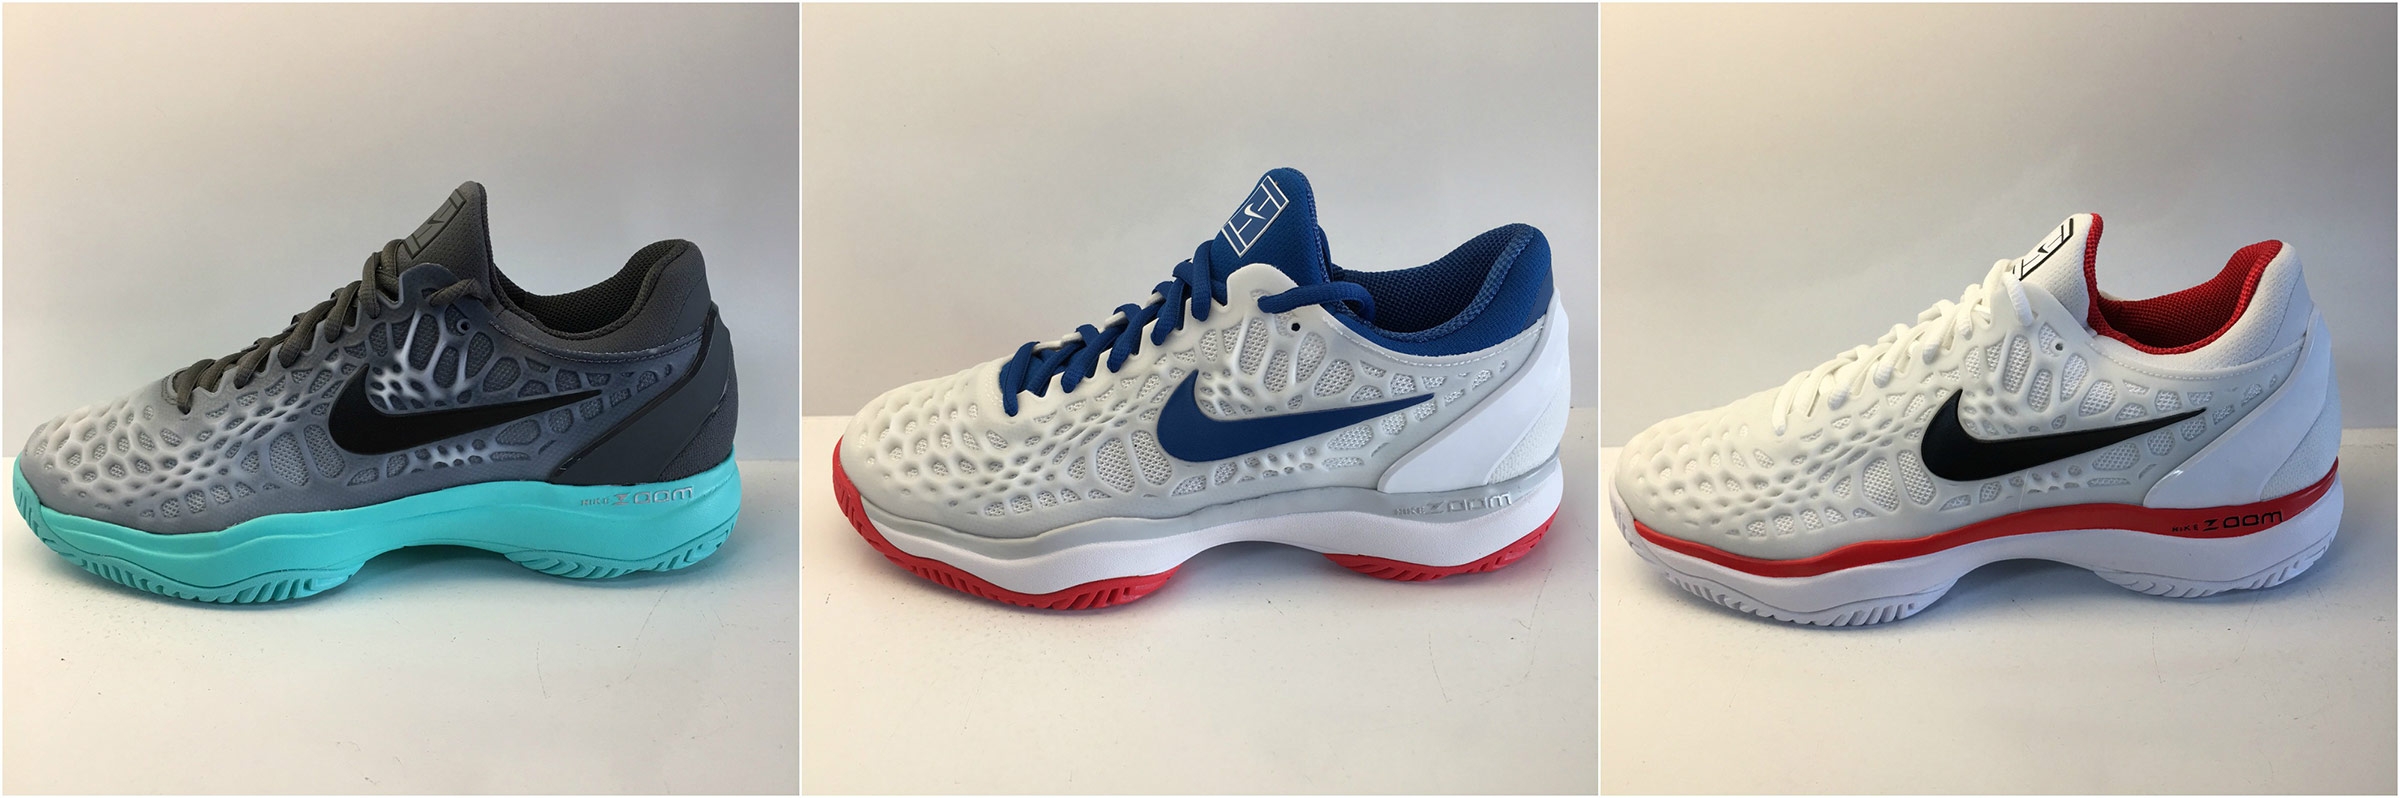 Product Spotlight: Nike Zoom Cage 3 